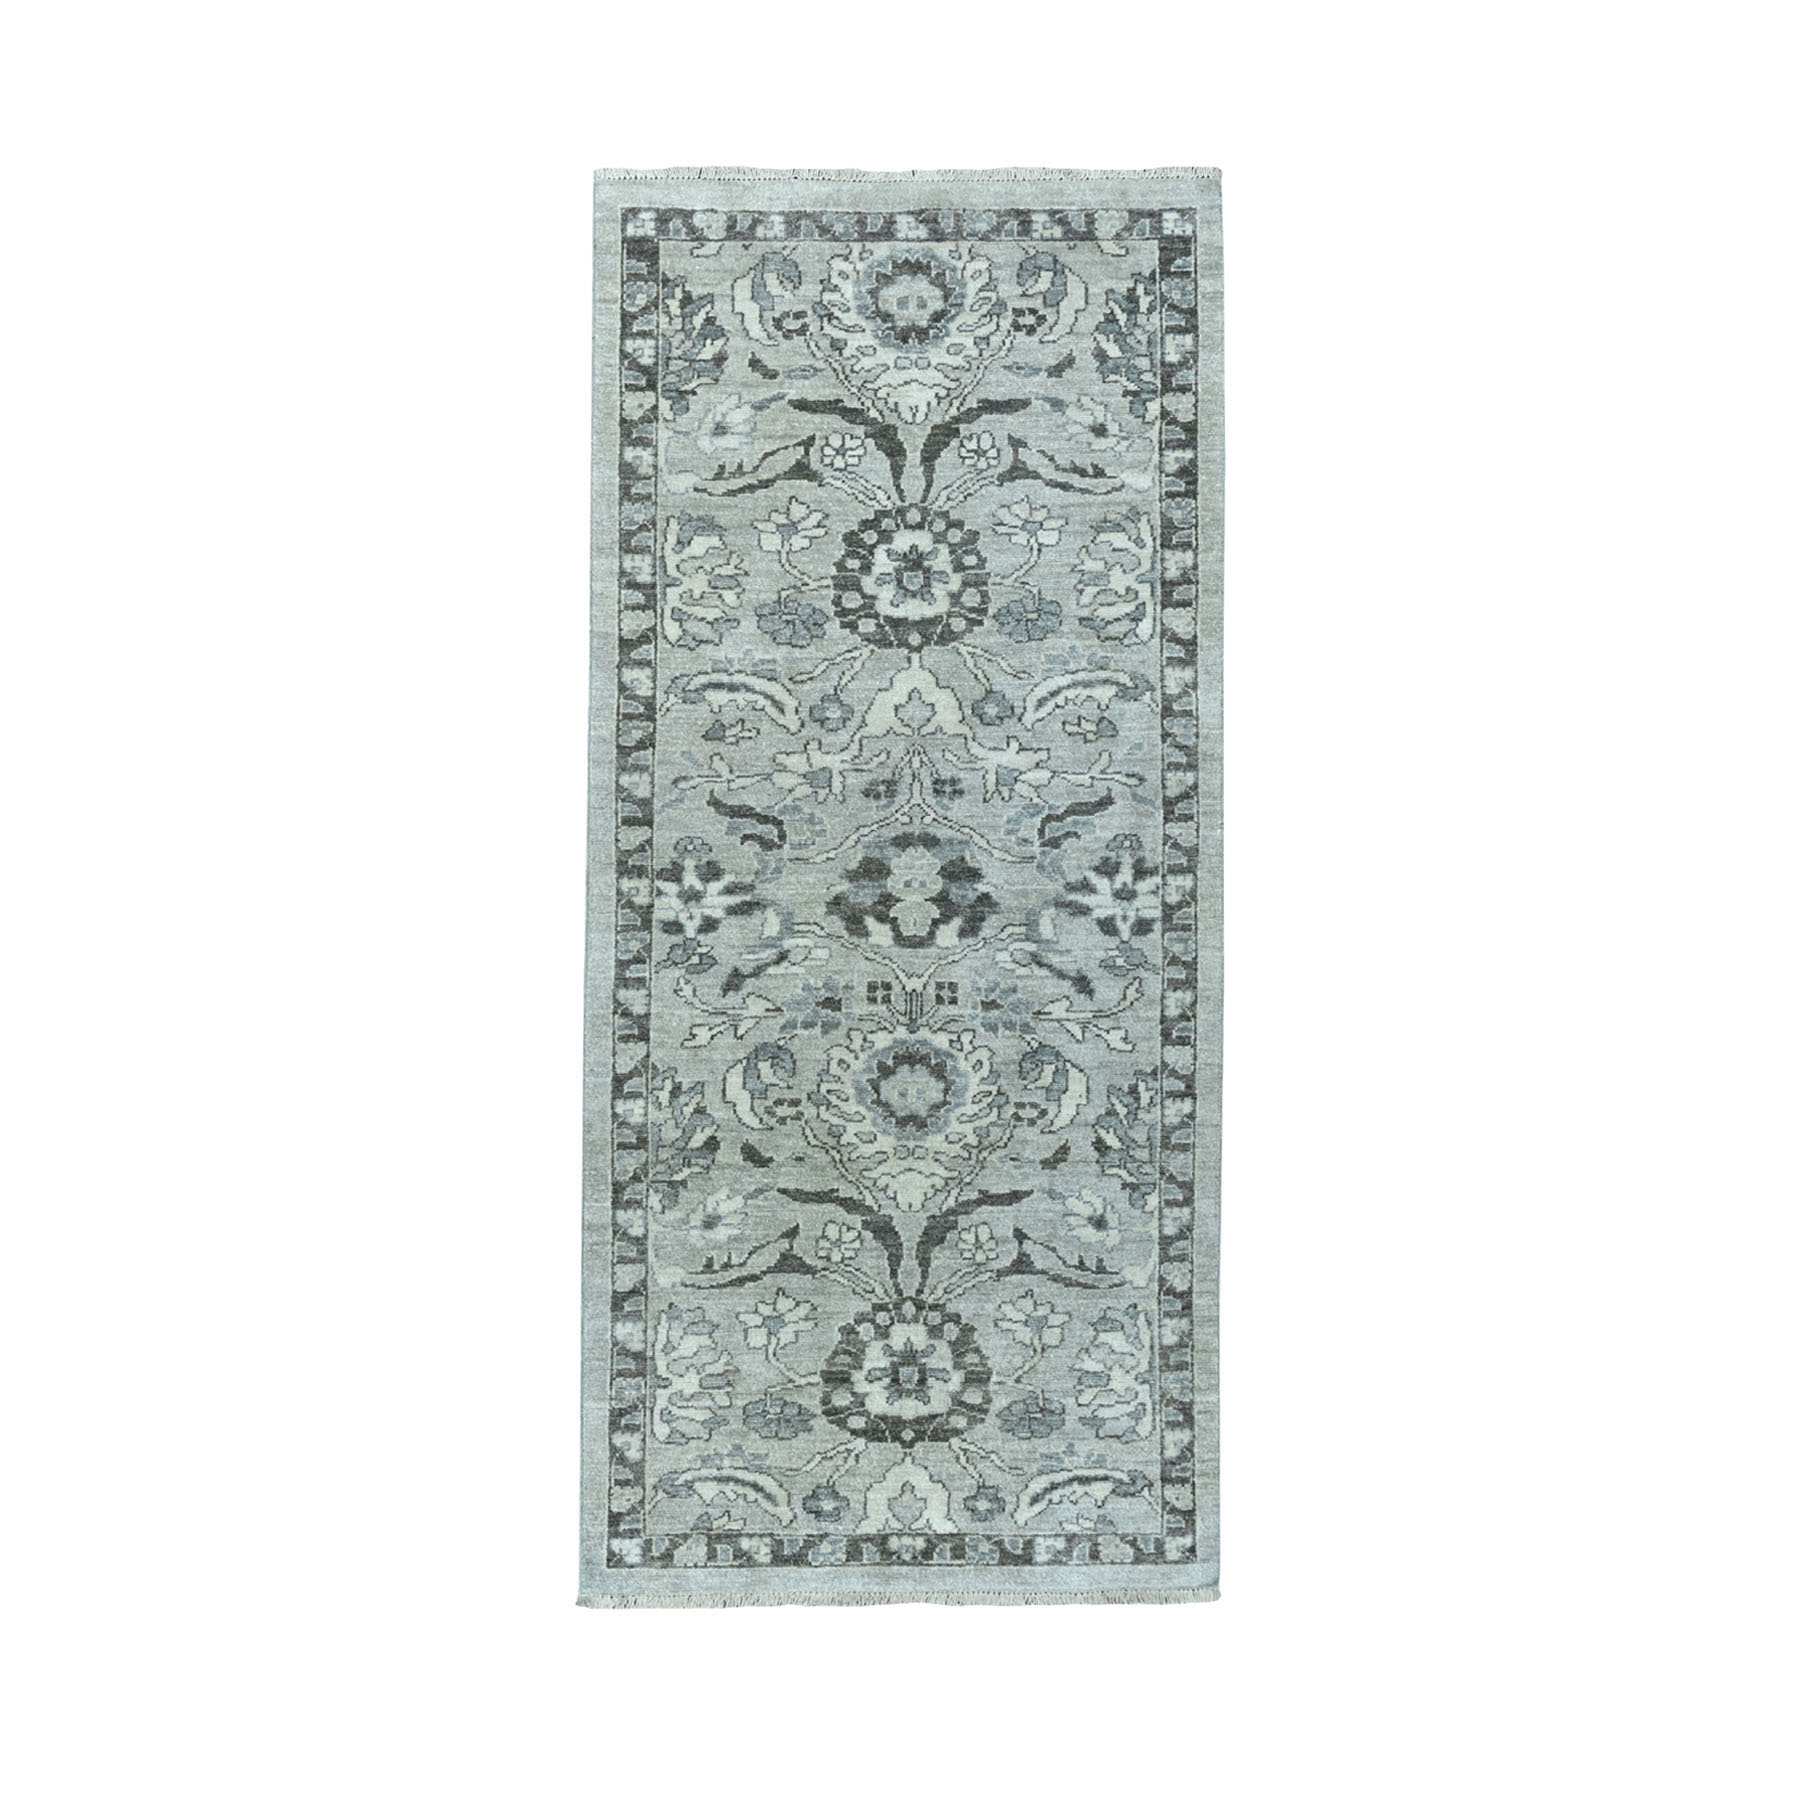 2'7"X5'9" Undyed Natural Wool Mahal Design Runner Hand Knotted Oriental Rug moaeadb9